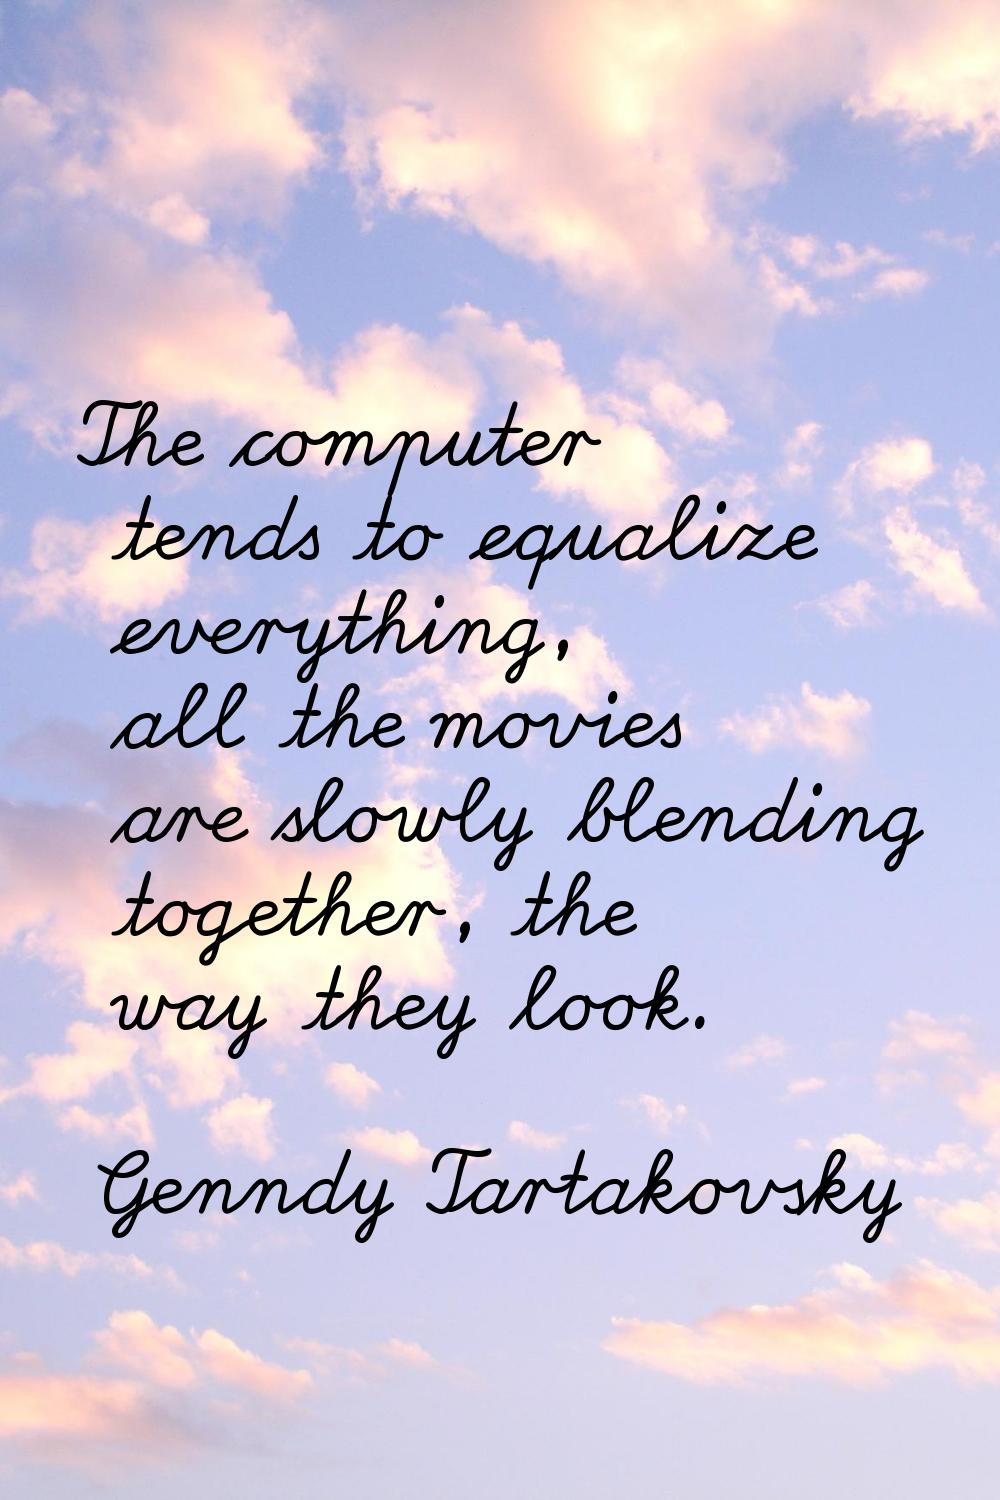 The computer tends to equalize everything, all the movies are slowly blending together, the way the